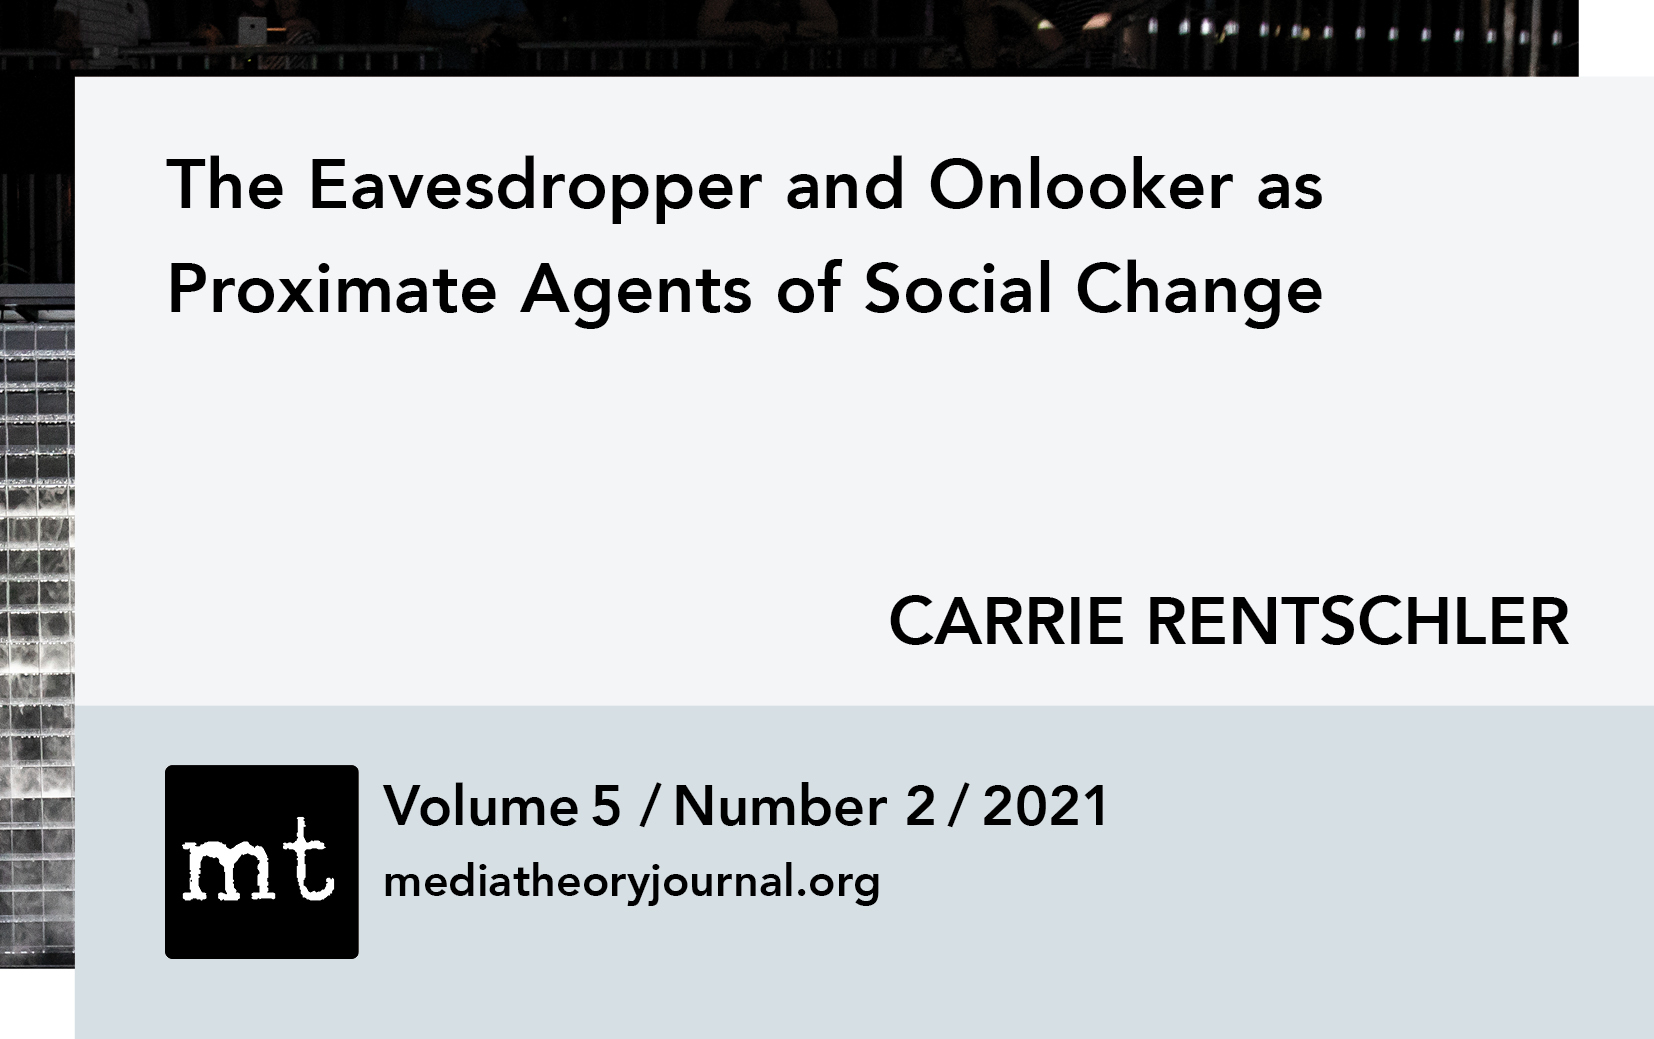 Carrie Rentschler: The Eavesdropper and Onlooker